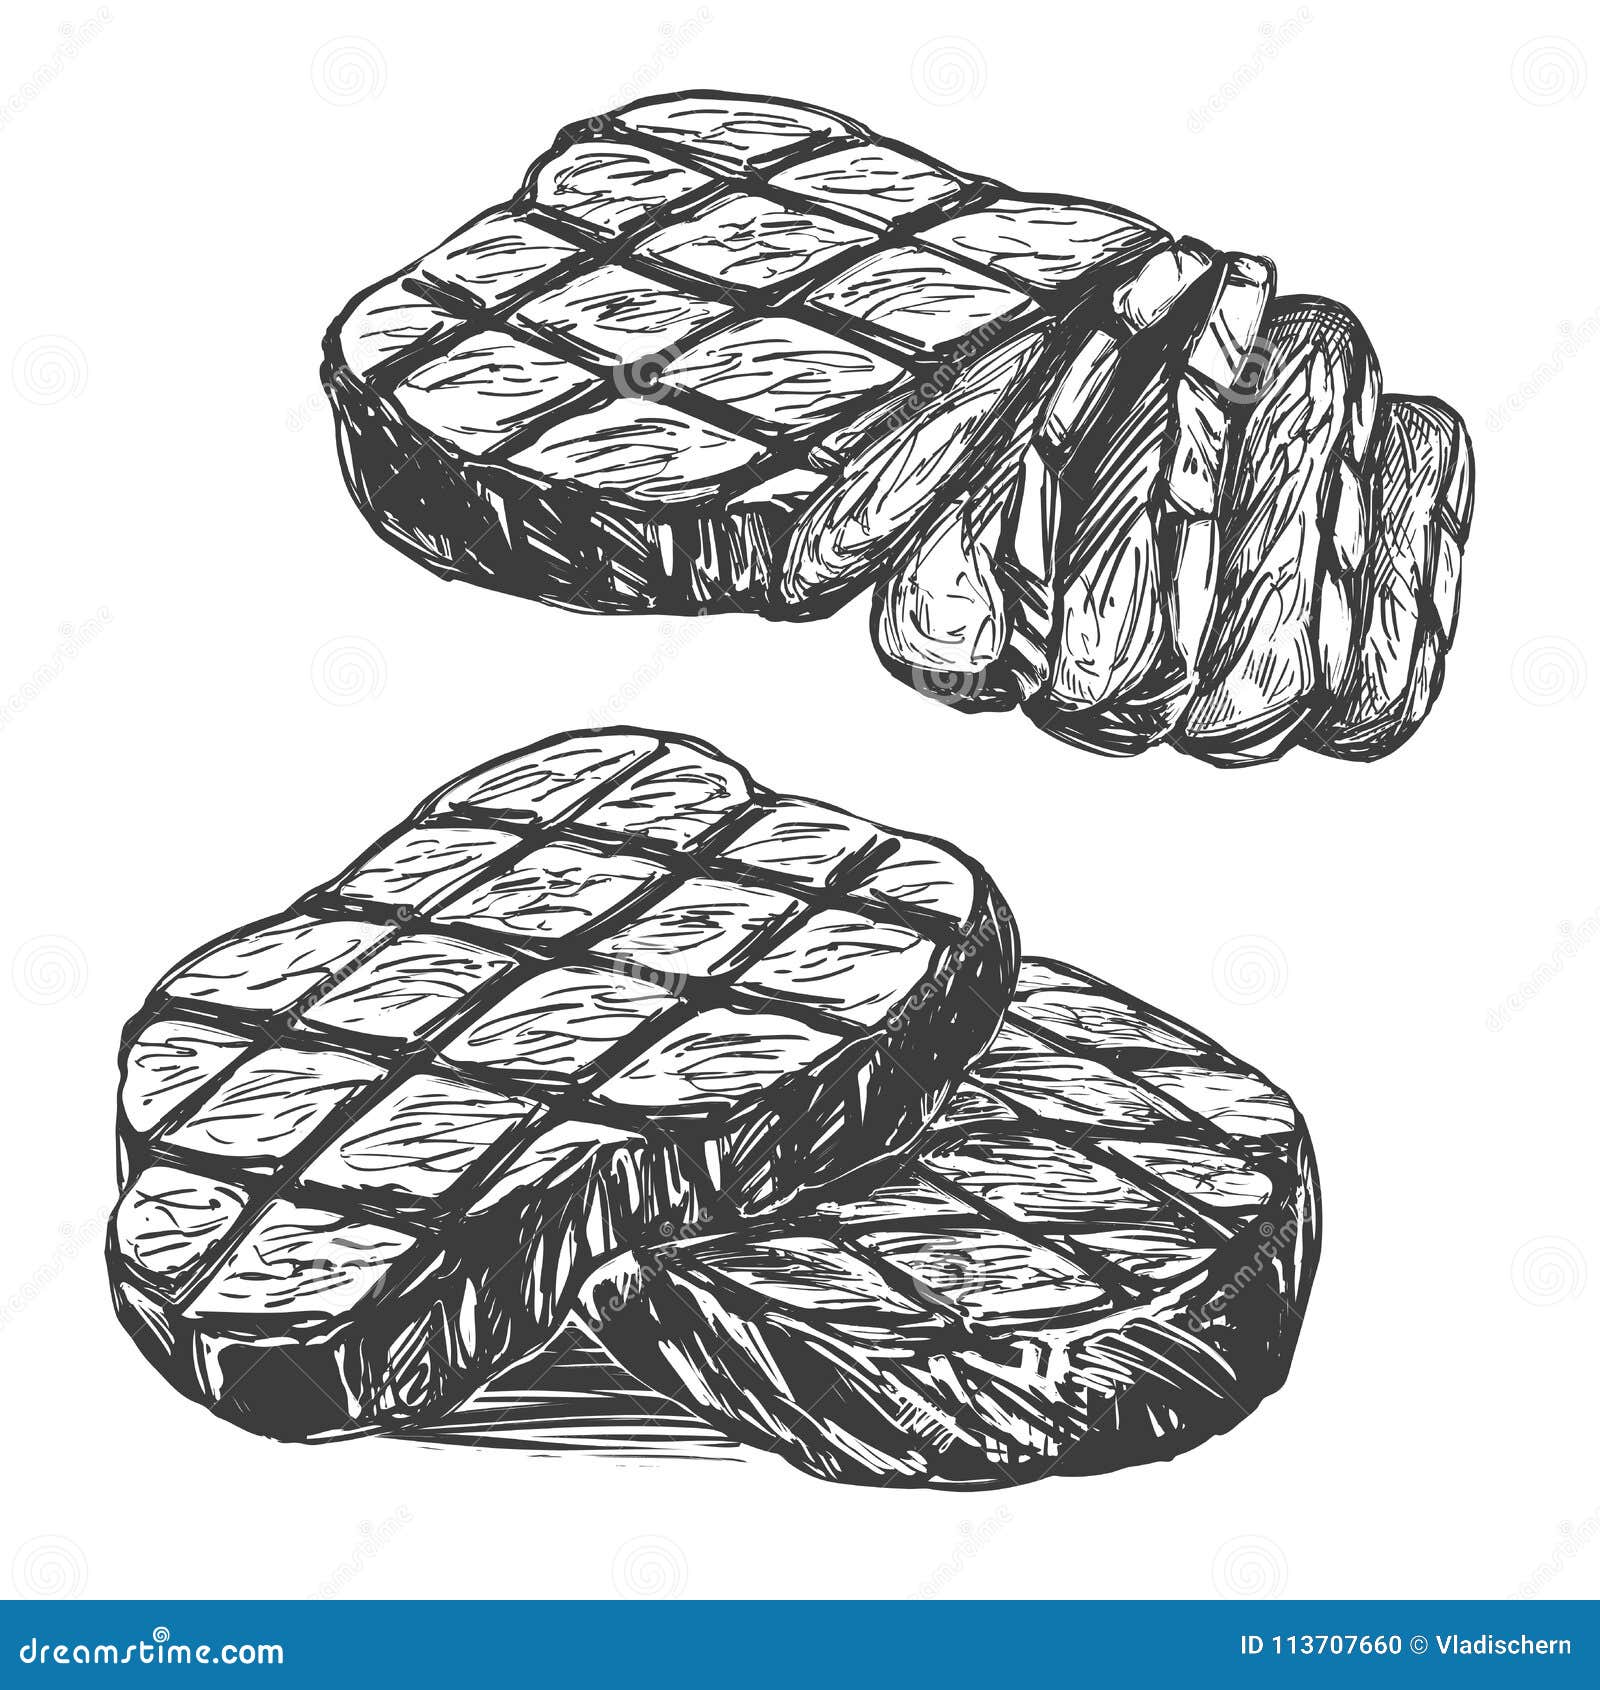 Grilled Steak Vector Sketch Meat Dish Illustration Barbecue Meat And  Vegetables Stock Illustration - Download Image Now - iStock